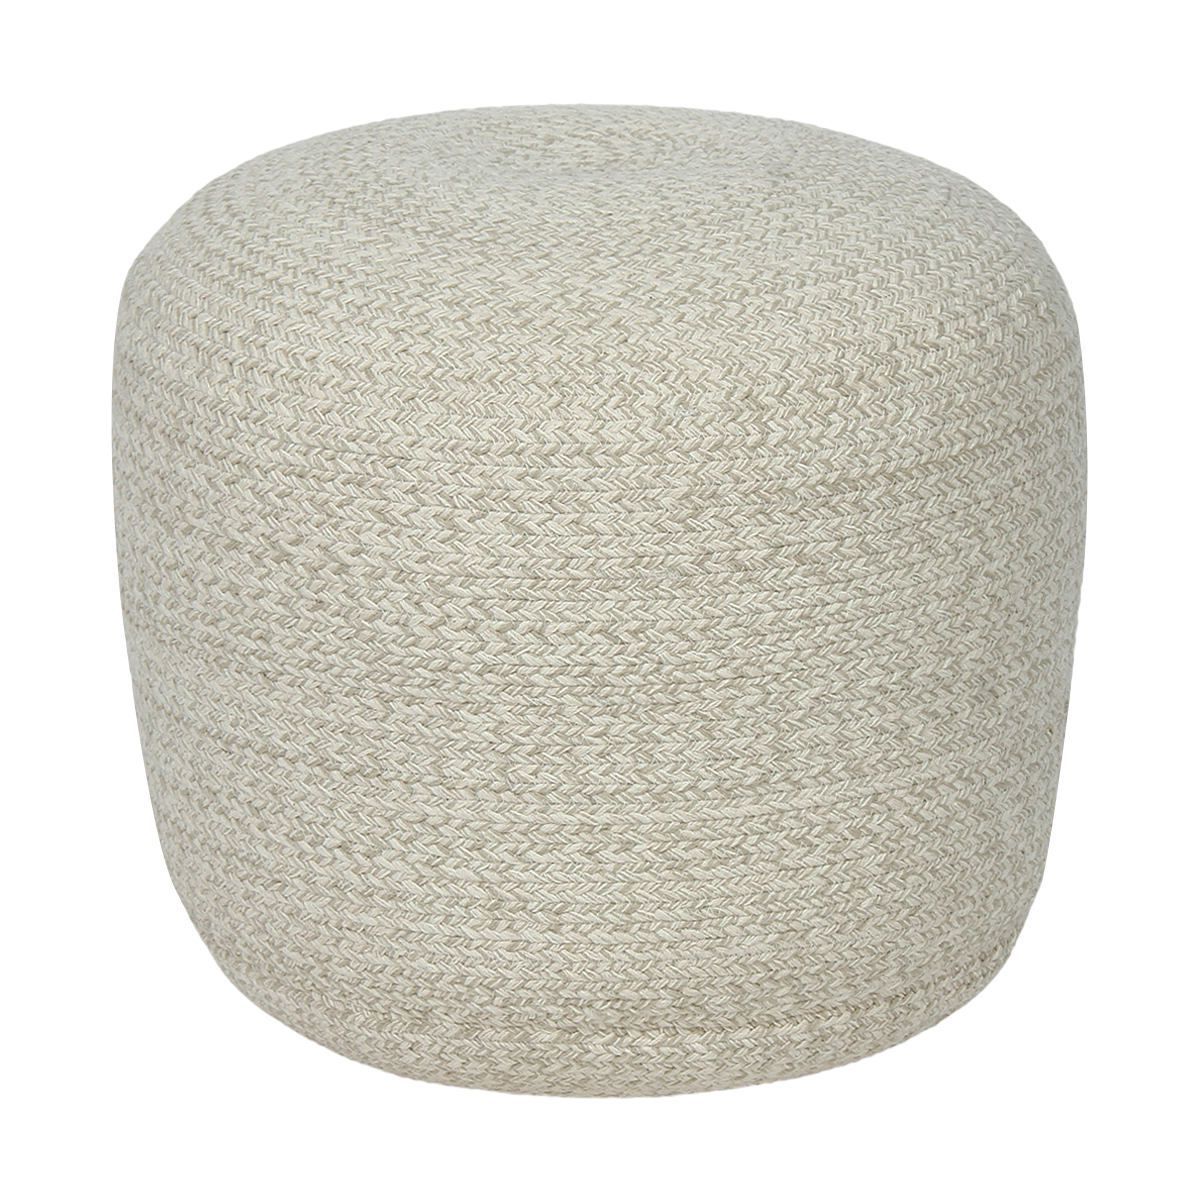 Natural Beige And White Cylinder Pouf Ottomans Inside Most Popular Natural Braided Ottoman (View 6 of 10)